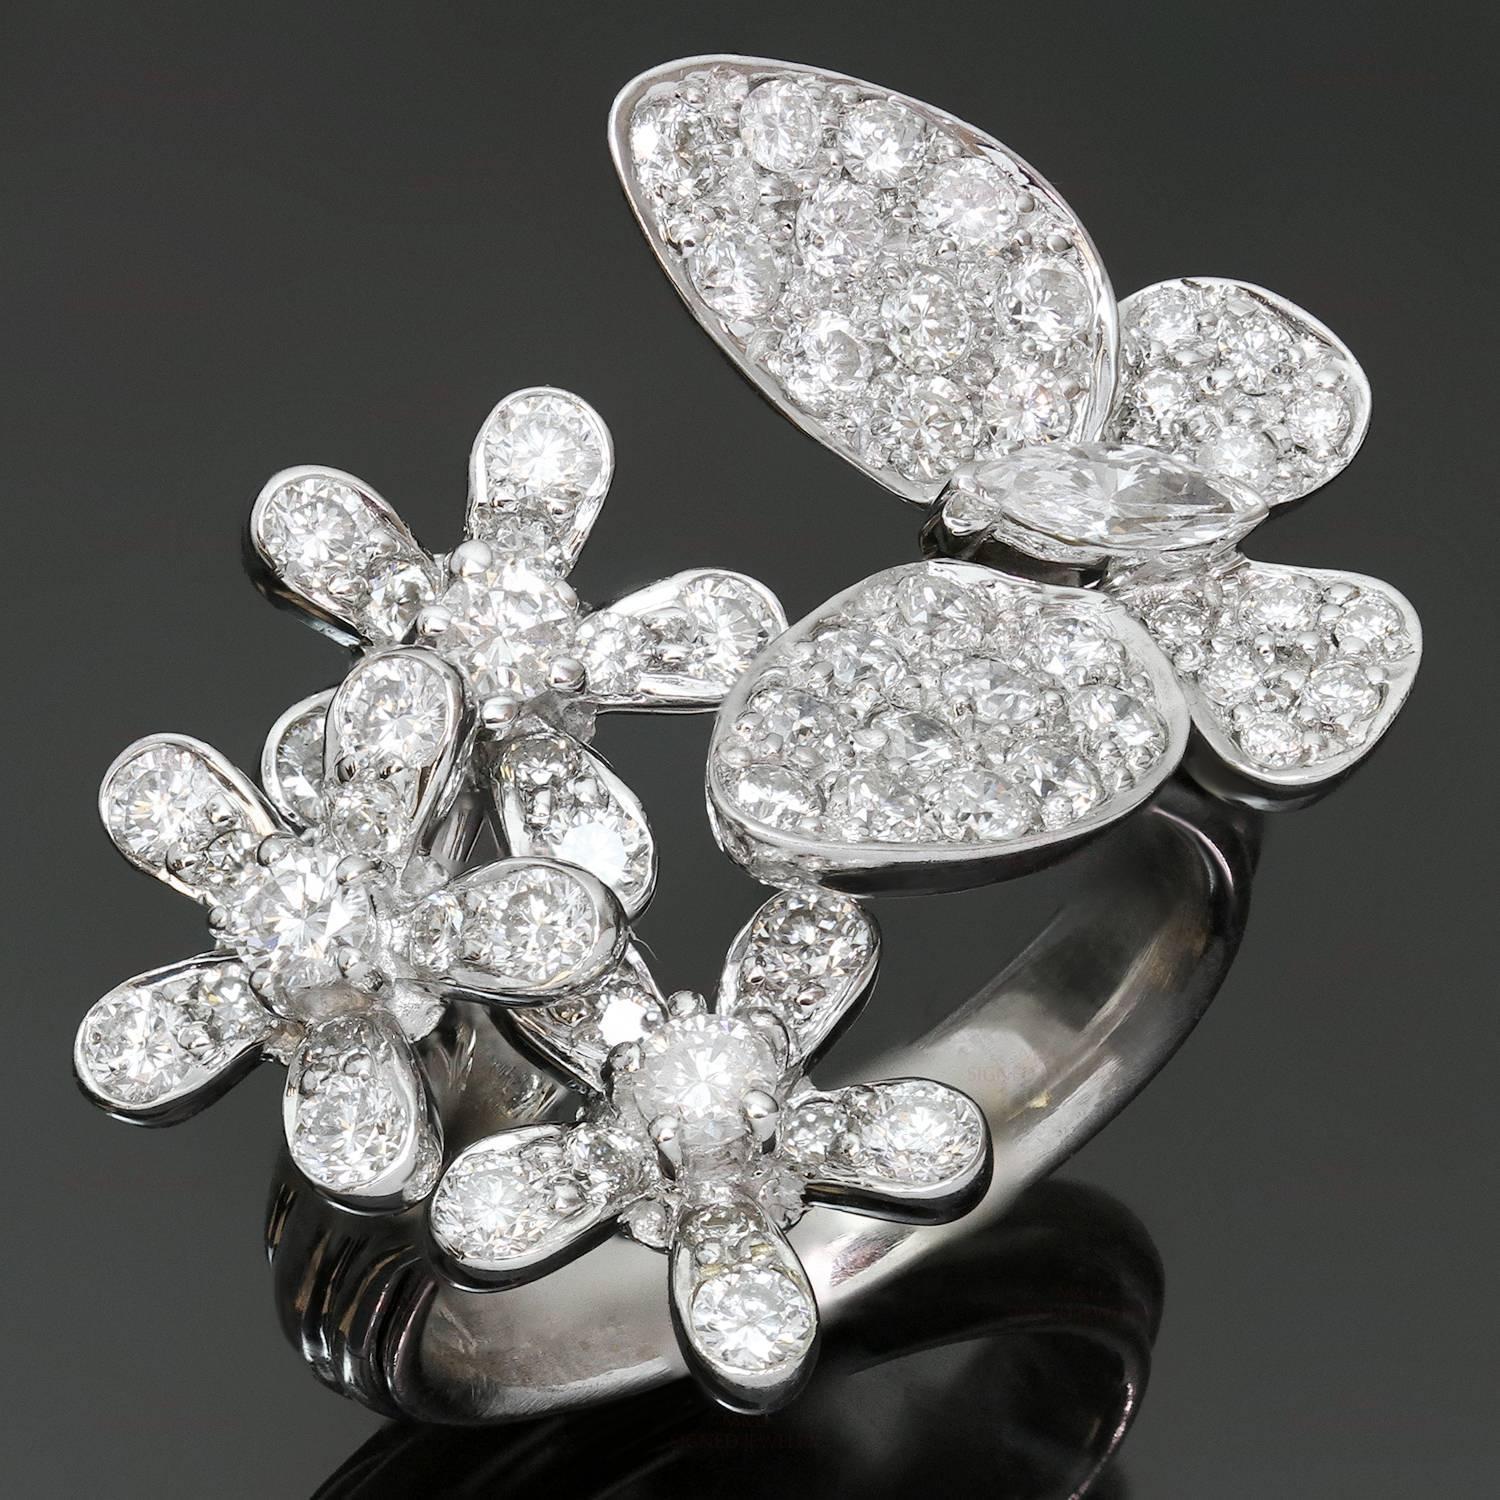 This exquisite ring features a flower and butterfly design crafted in 18k white gold and set with brilliant-cut round diamonds of an estimated 1.26 carats. Made in United States circa 2010s. Measurements: 0.78